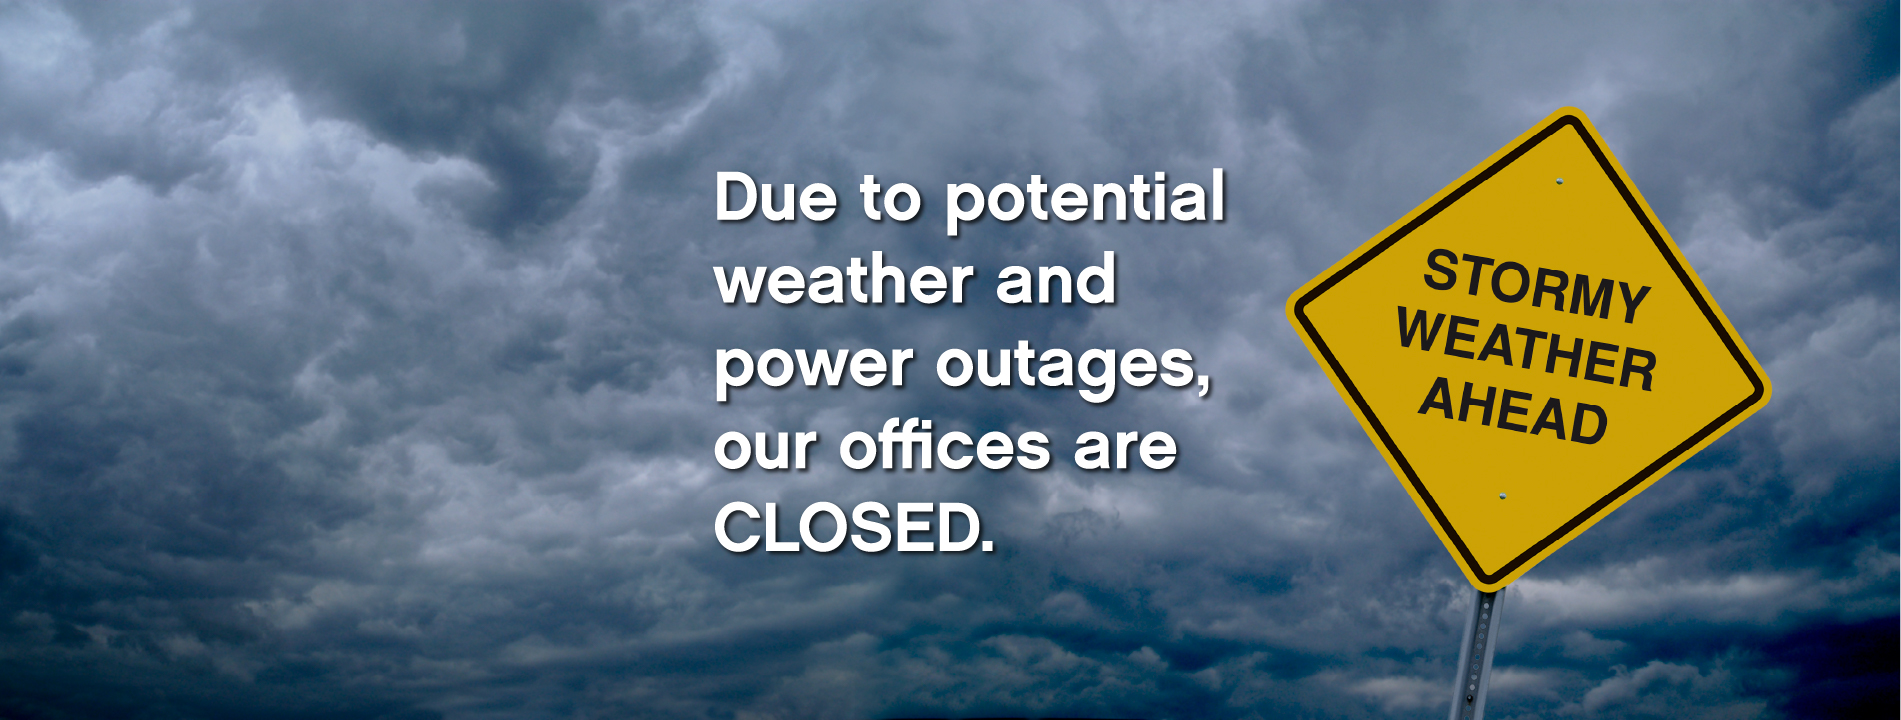 Due to potential weather and power outages, our offices are CLOSED.